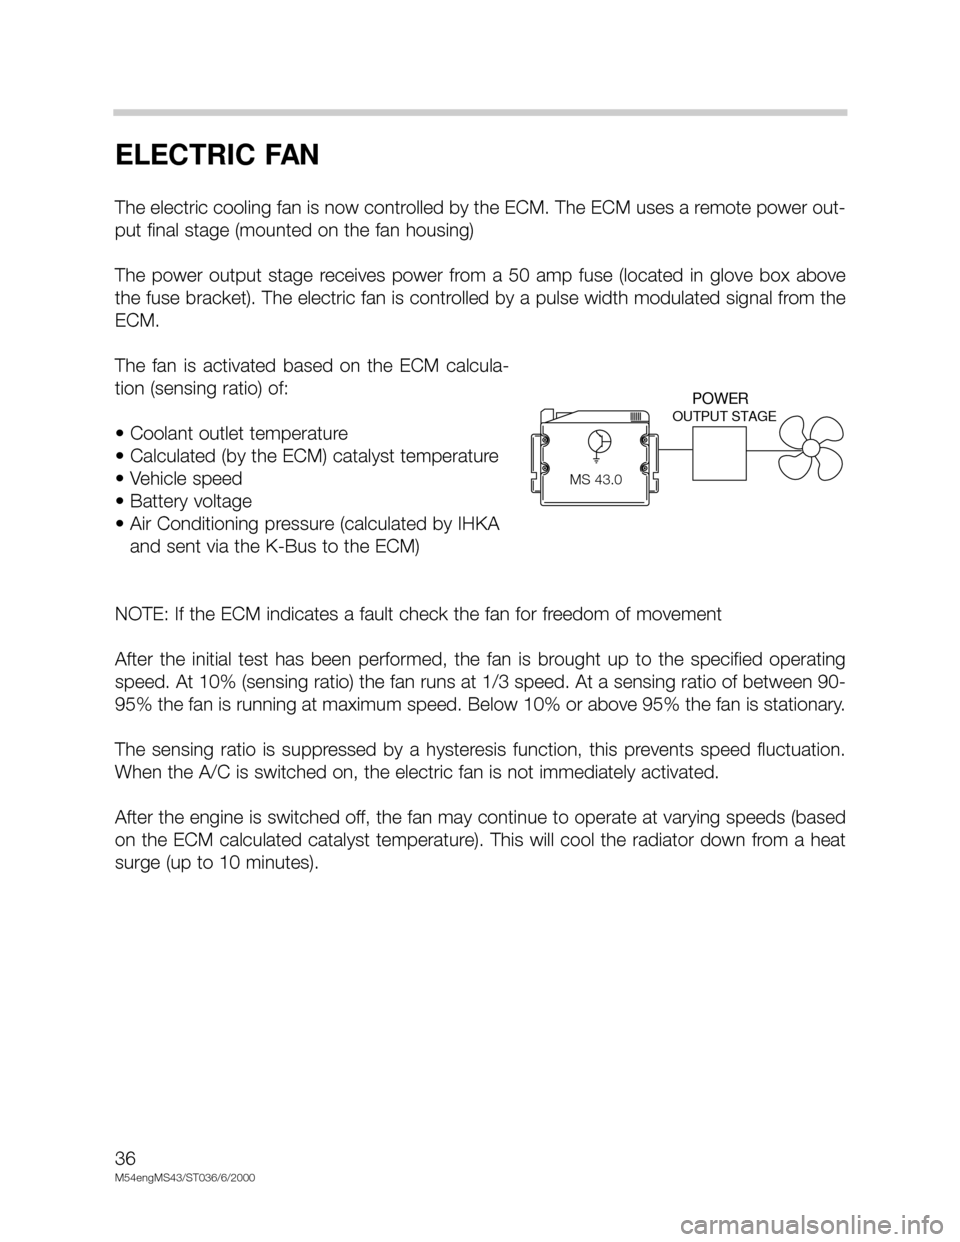 BMW X5 2001 E53 M54 Engine Owners Guide 36
M54engMS43/ST036/6/2000
ELECTRIC FAN
The electric cooling fan is now controlled by the ECM. The ECM uses a remote power out-
put final stage (mounted on the fan housing)
The  power  output  stage  